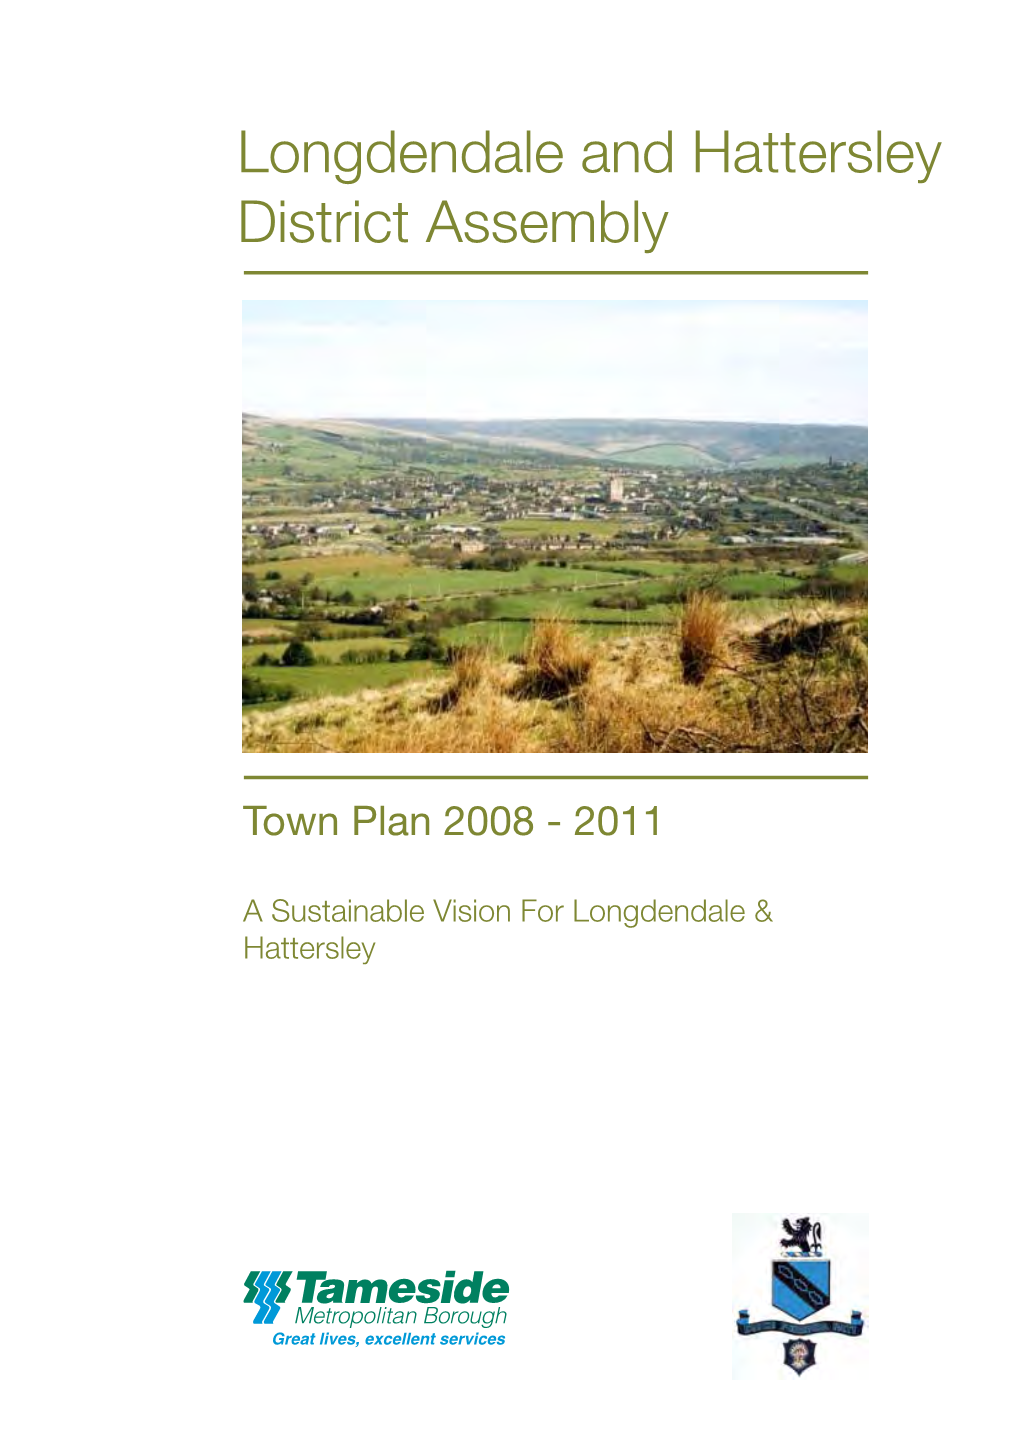 Longdendale and Hattersley District Assembly Town Plan